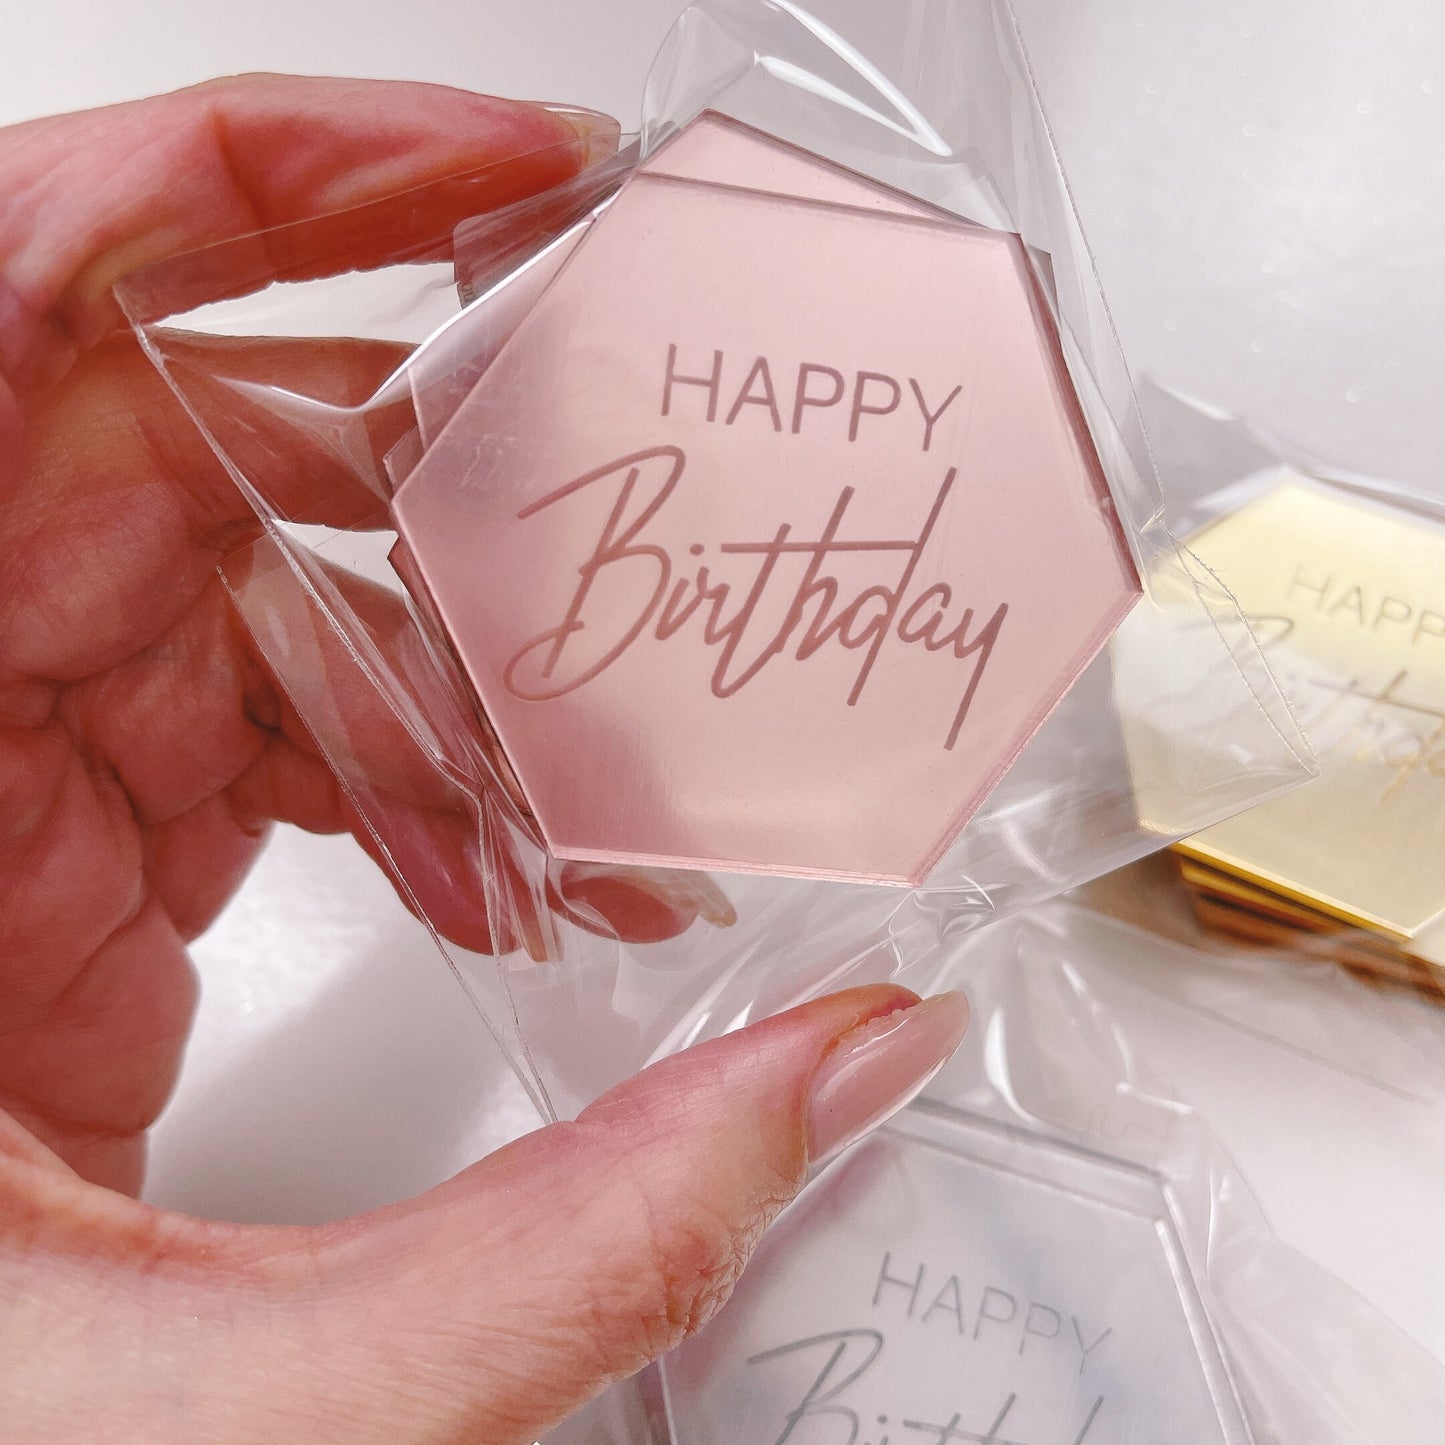 More Charms - Happy Birthday - Capitals and Script - Hexagonal